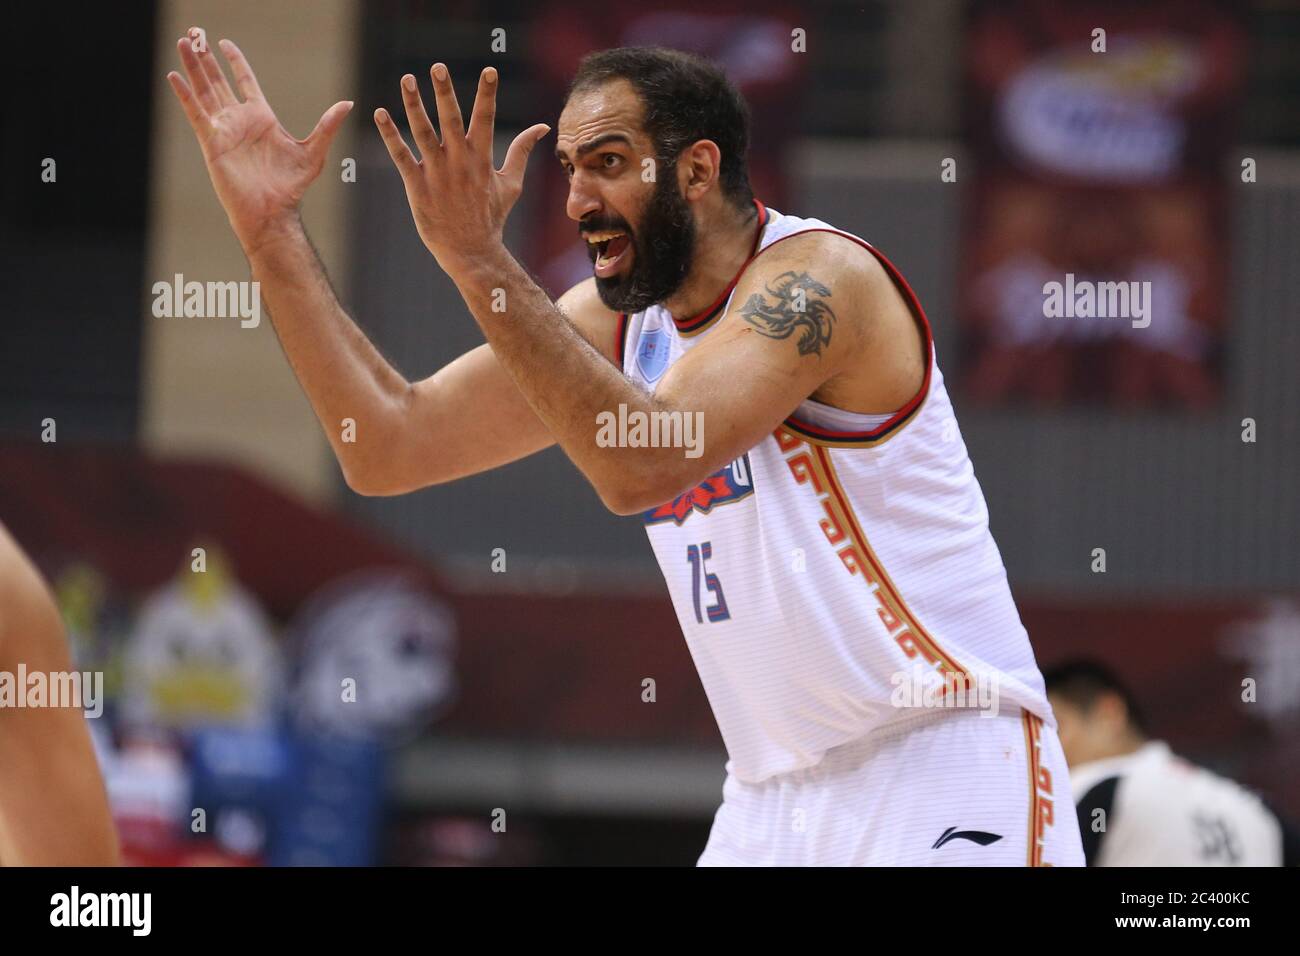 Iranian professional basketball player Hamed Haddadi of Nanjing Tongxi  Monkey King reacts during a game at the first stage of Chinese Basketball  Association (CBA) resumption against Zhejiang Guangsha Lions, Qingdao city,  east